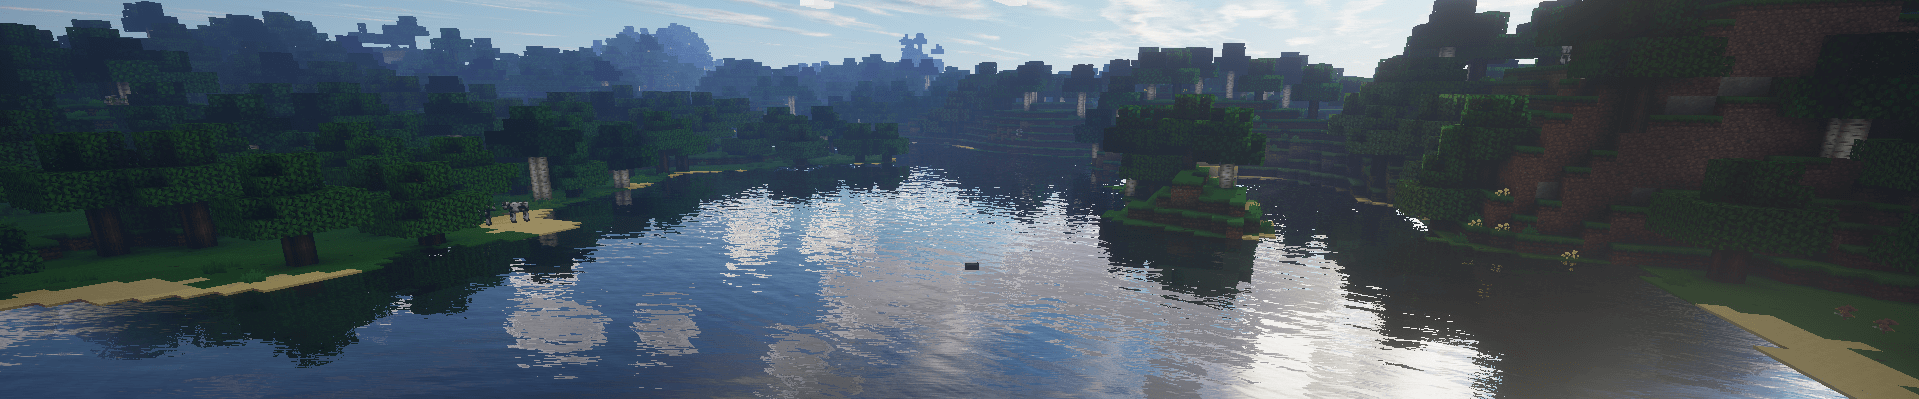 A lake surrounded by trees in Minecraft